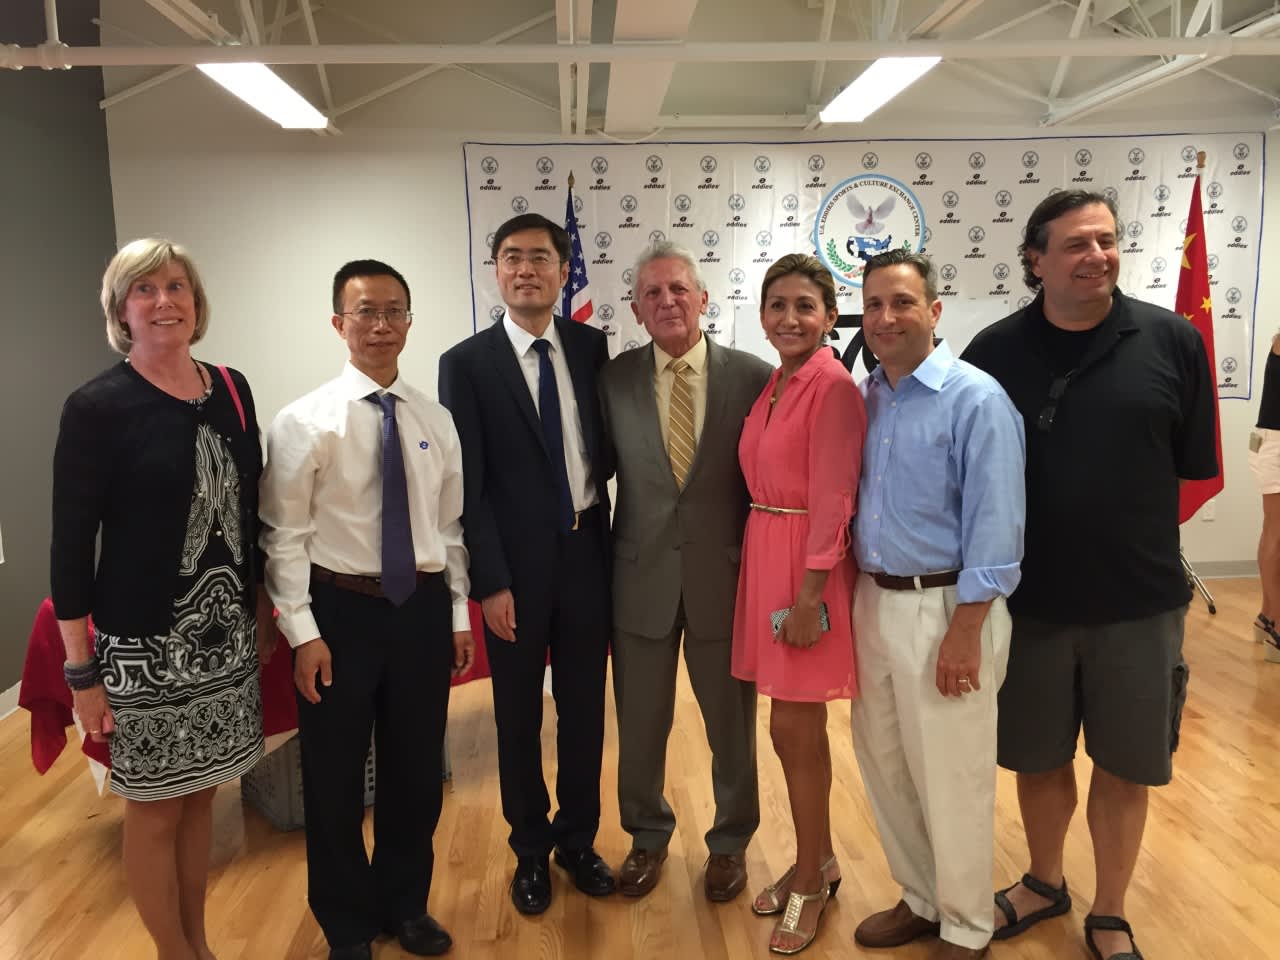 Norwalk Mayor Harry Rilling, state Sens. Bob Duff and William Tong along with local officials welcome the Chinese Olympic Swim Team to Norwalk on Friday.